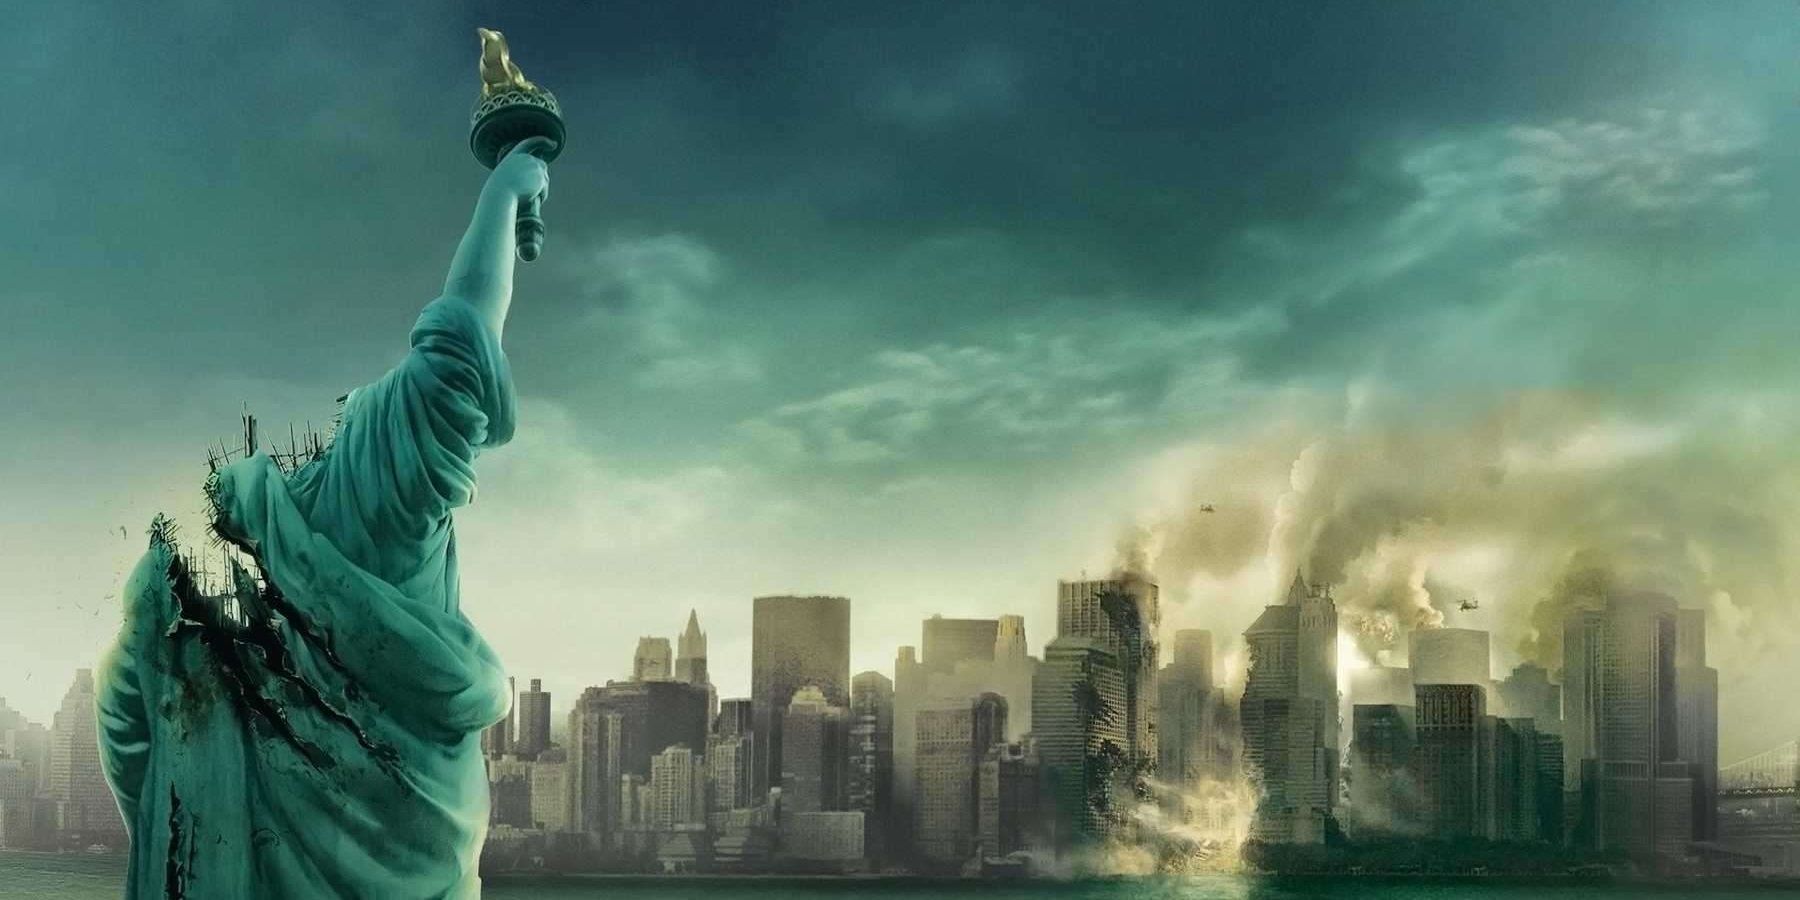 The poster for Cloverfield